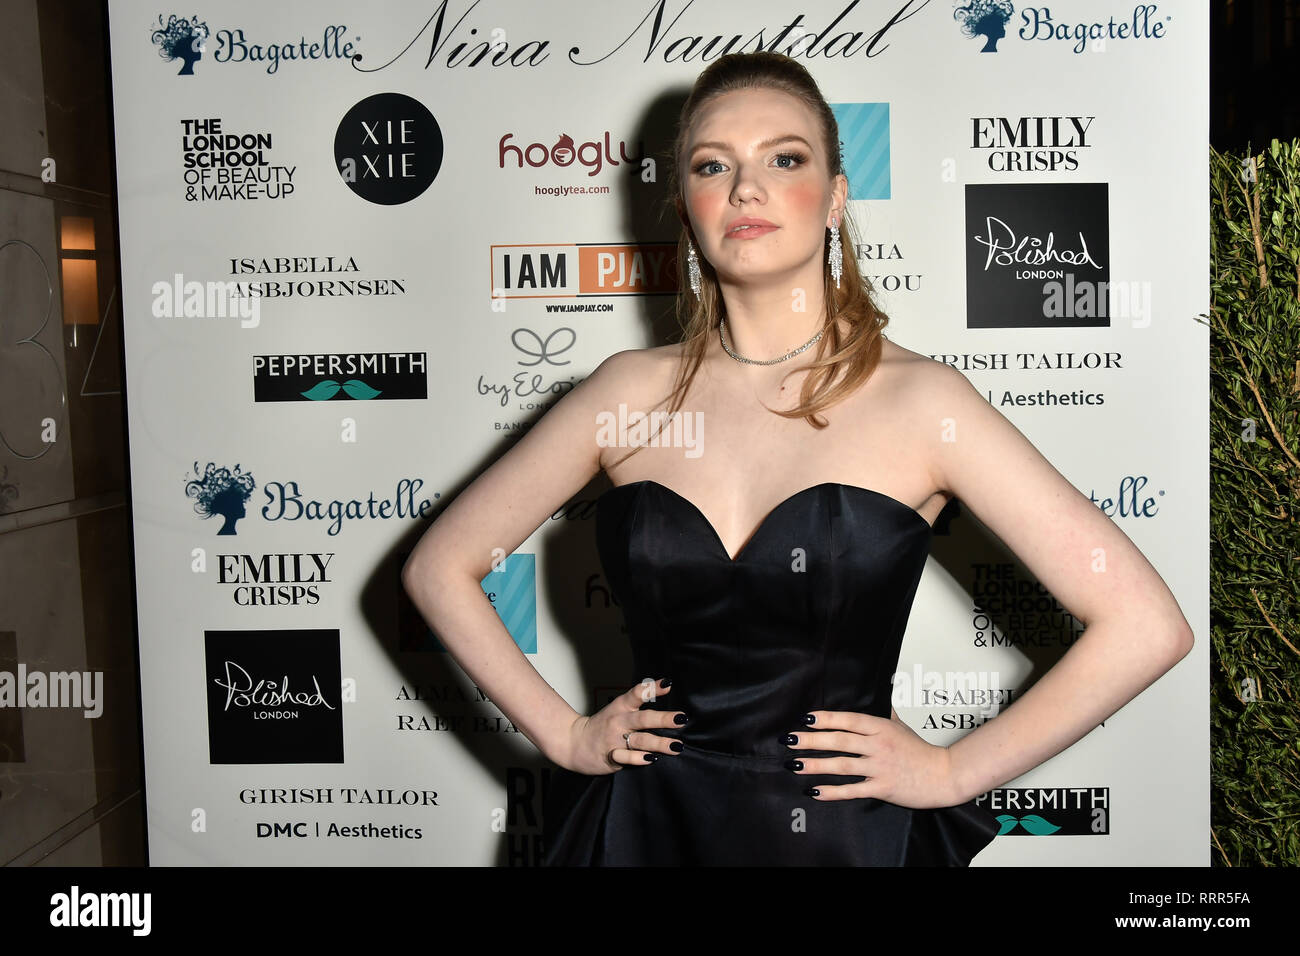 London, UK. 26th Feb 2019. Beth Wareing is a Ballet Dancer performs at Nina Naustdal catwalk show SS19/20 collection by The London School of Beauty & Make-up at Bagatelle on 26 Feb 2019, London, UK. Credit: Picture Capital/Alamy Live News Stock Photo